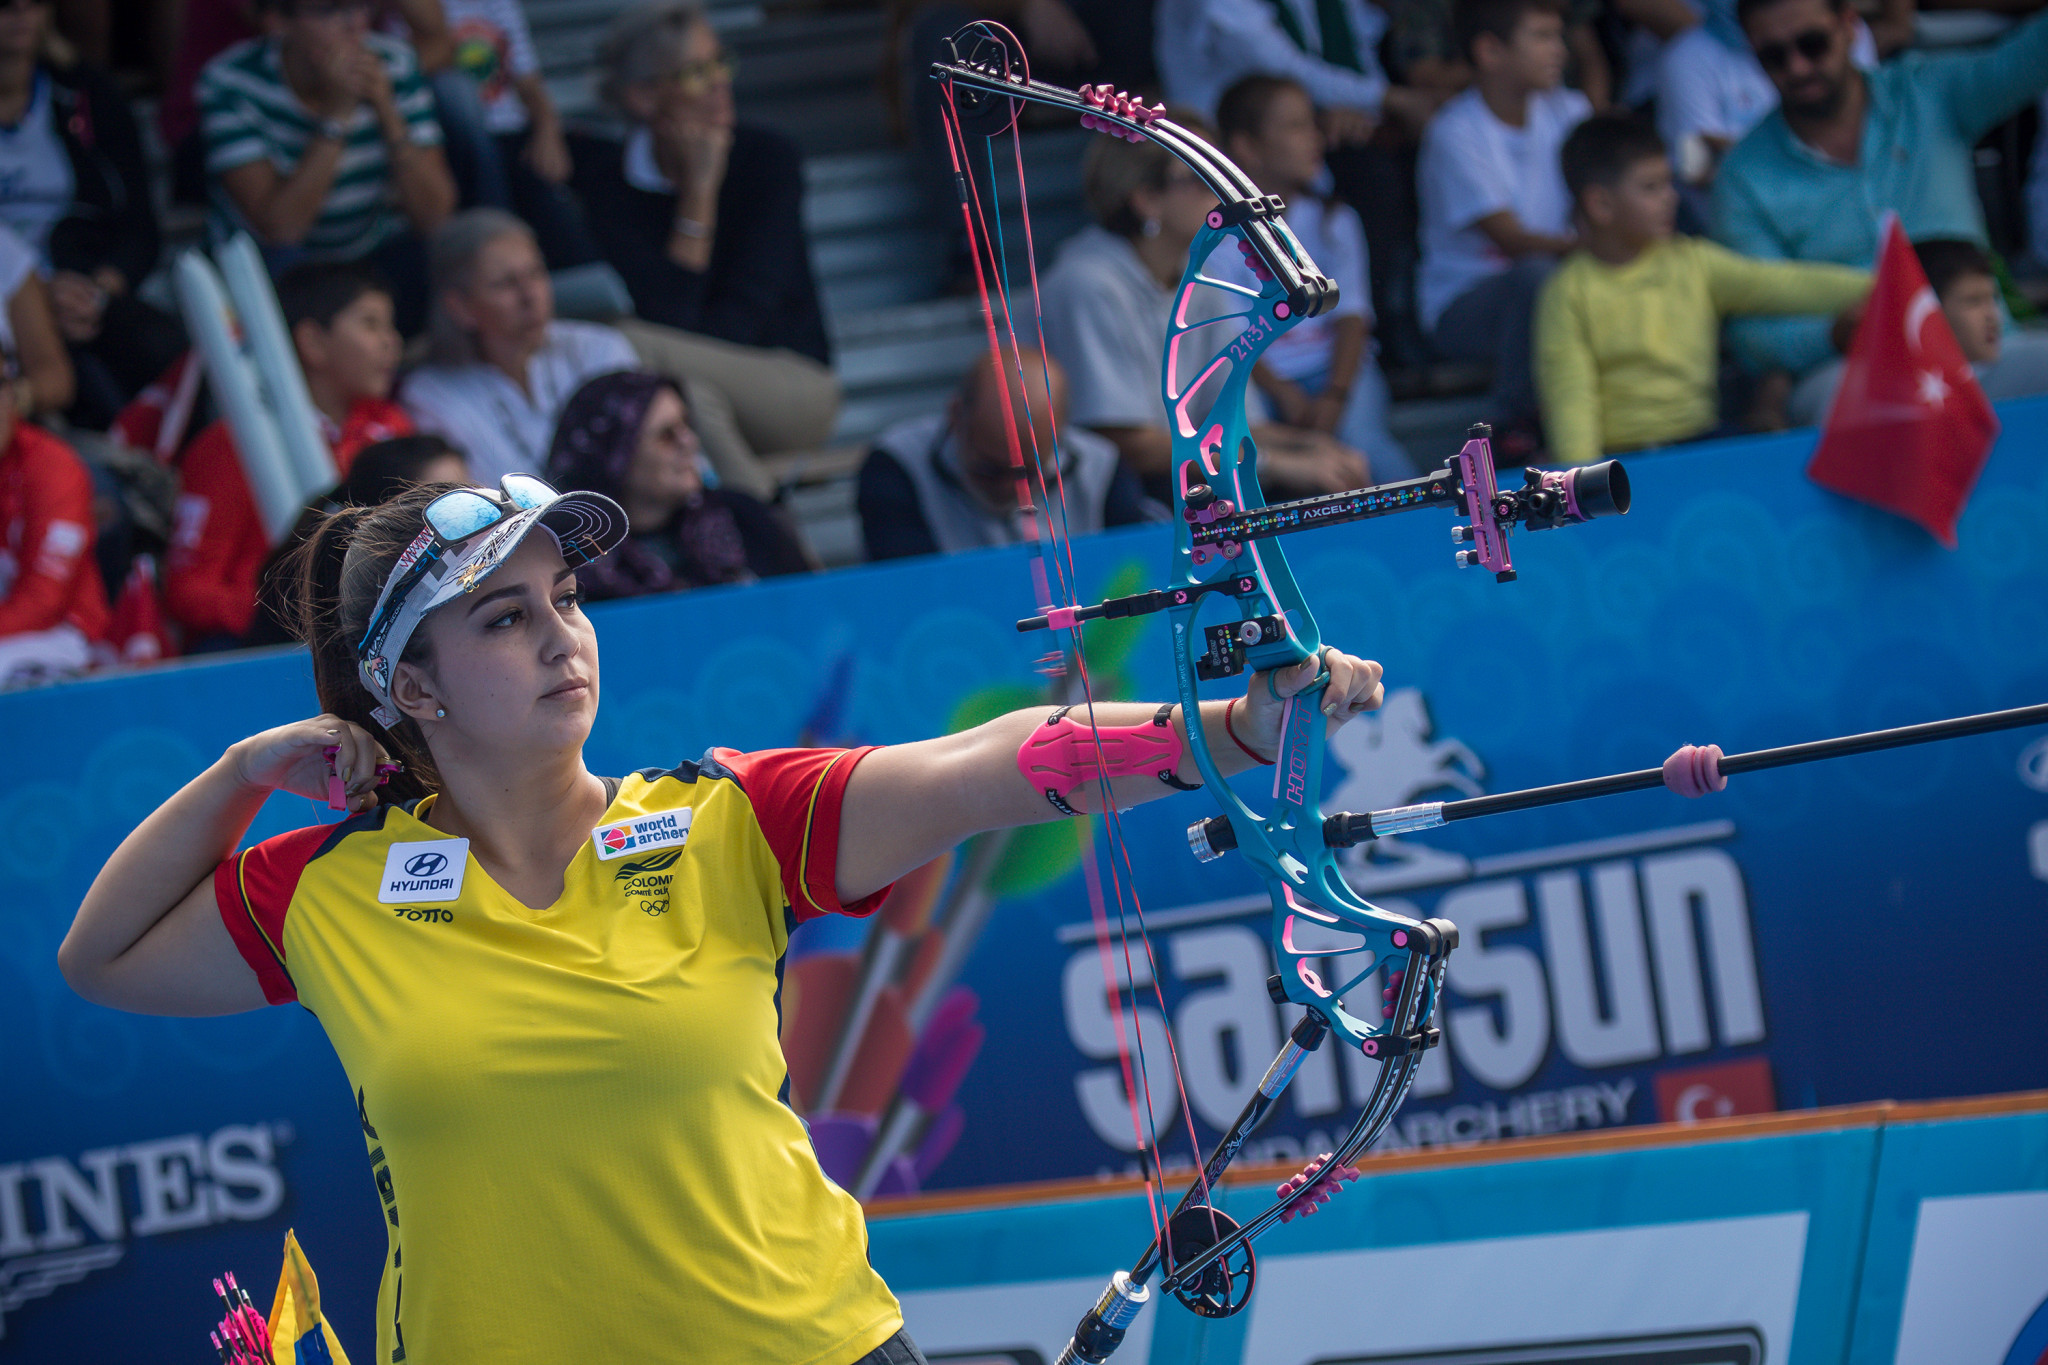 Sara Lopez claimed the women's compound archer prize for the fourth straight year ©Getty Images